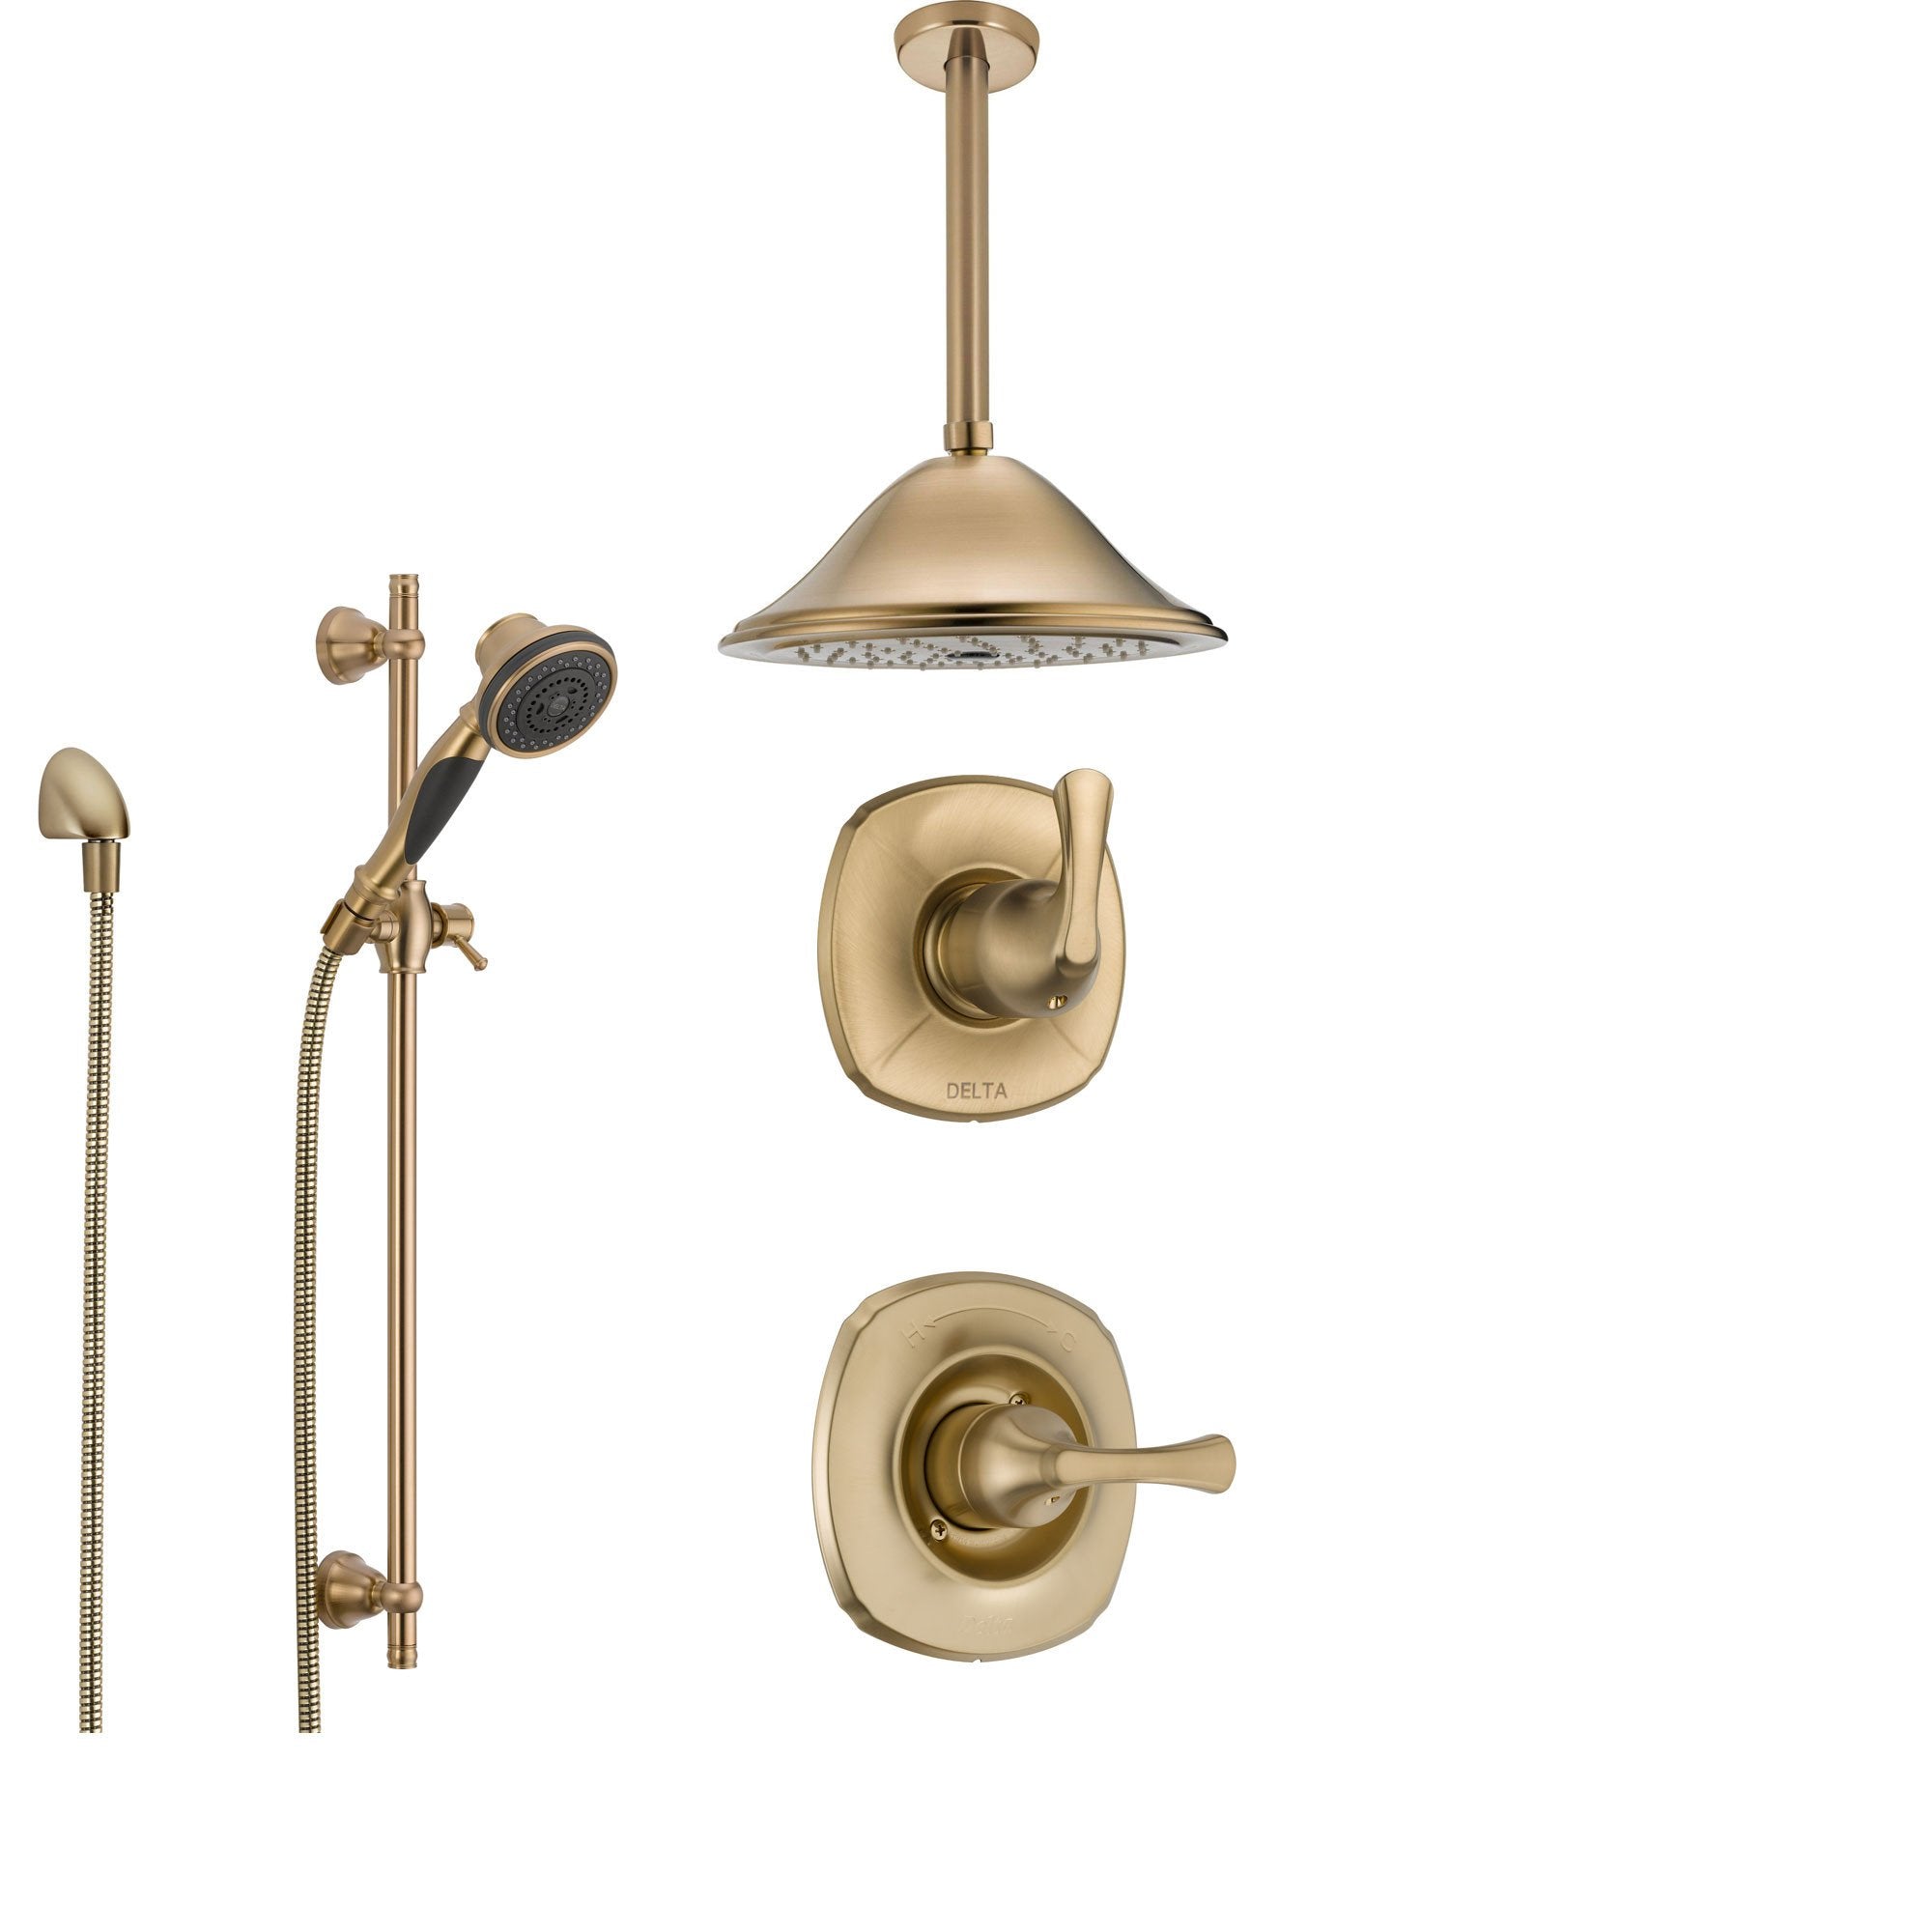 Delta Addison Champagne Bronze Shower System with Normal Shower Handle, 3-setting Diverter, Large Ceiling Mount Shower Head, and Handheld Shower Spray SS149282CZ